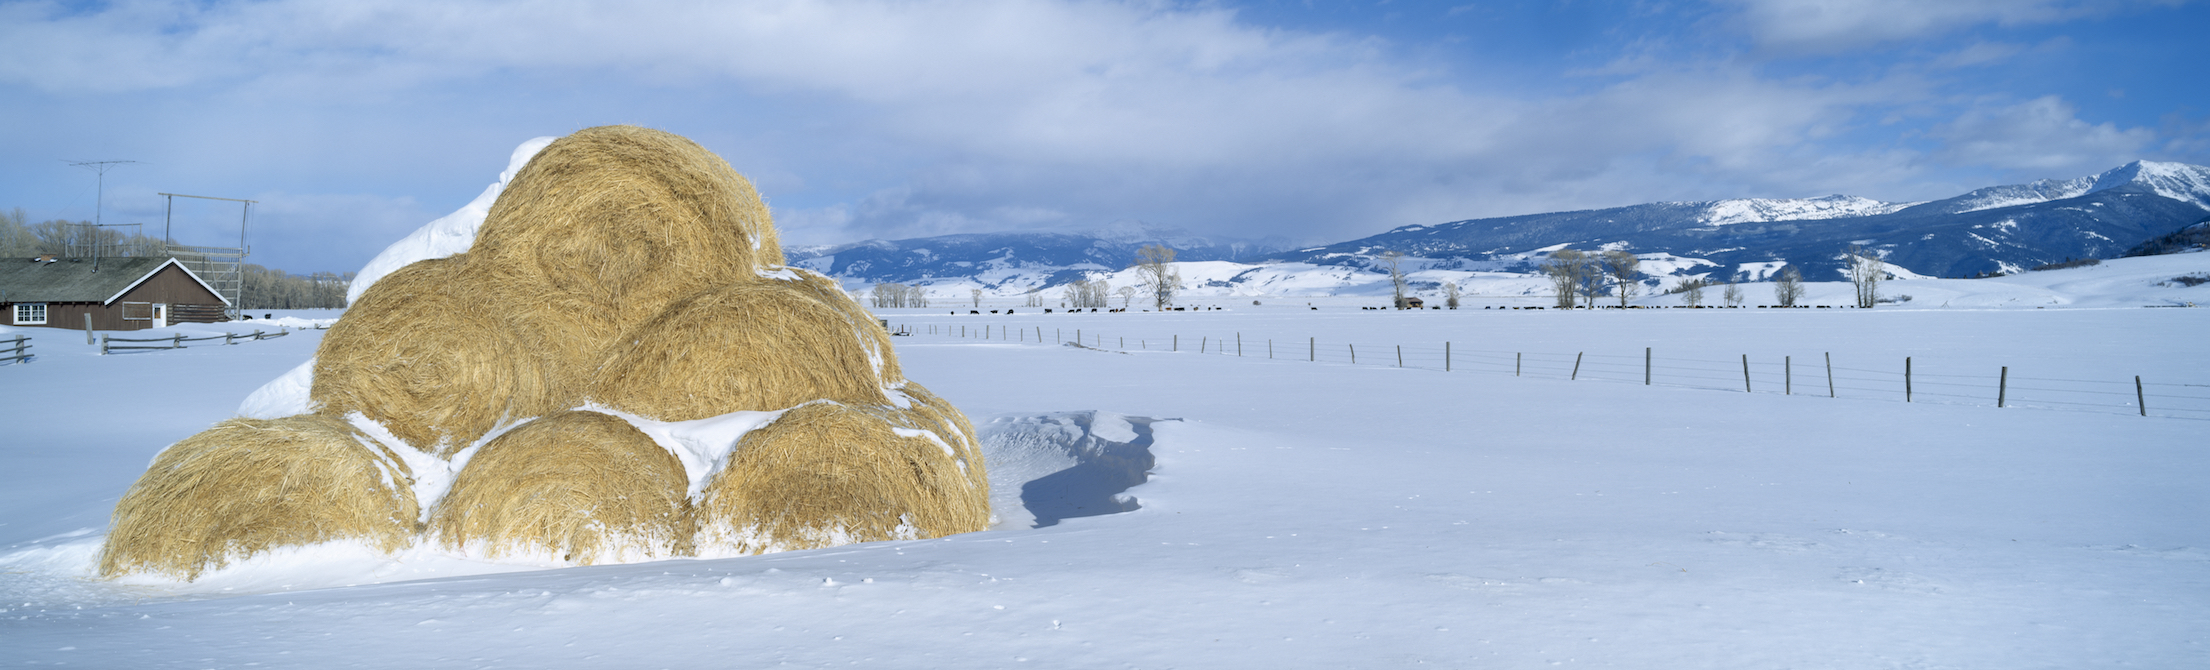 Winter on a Wyoming ranch